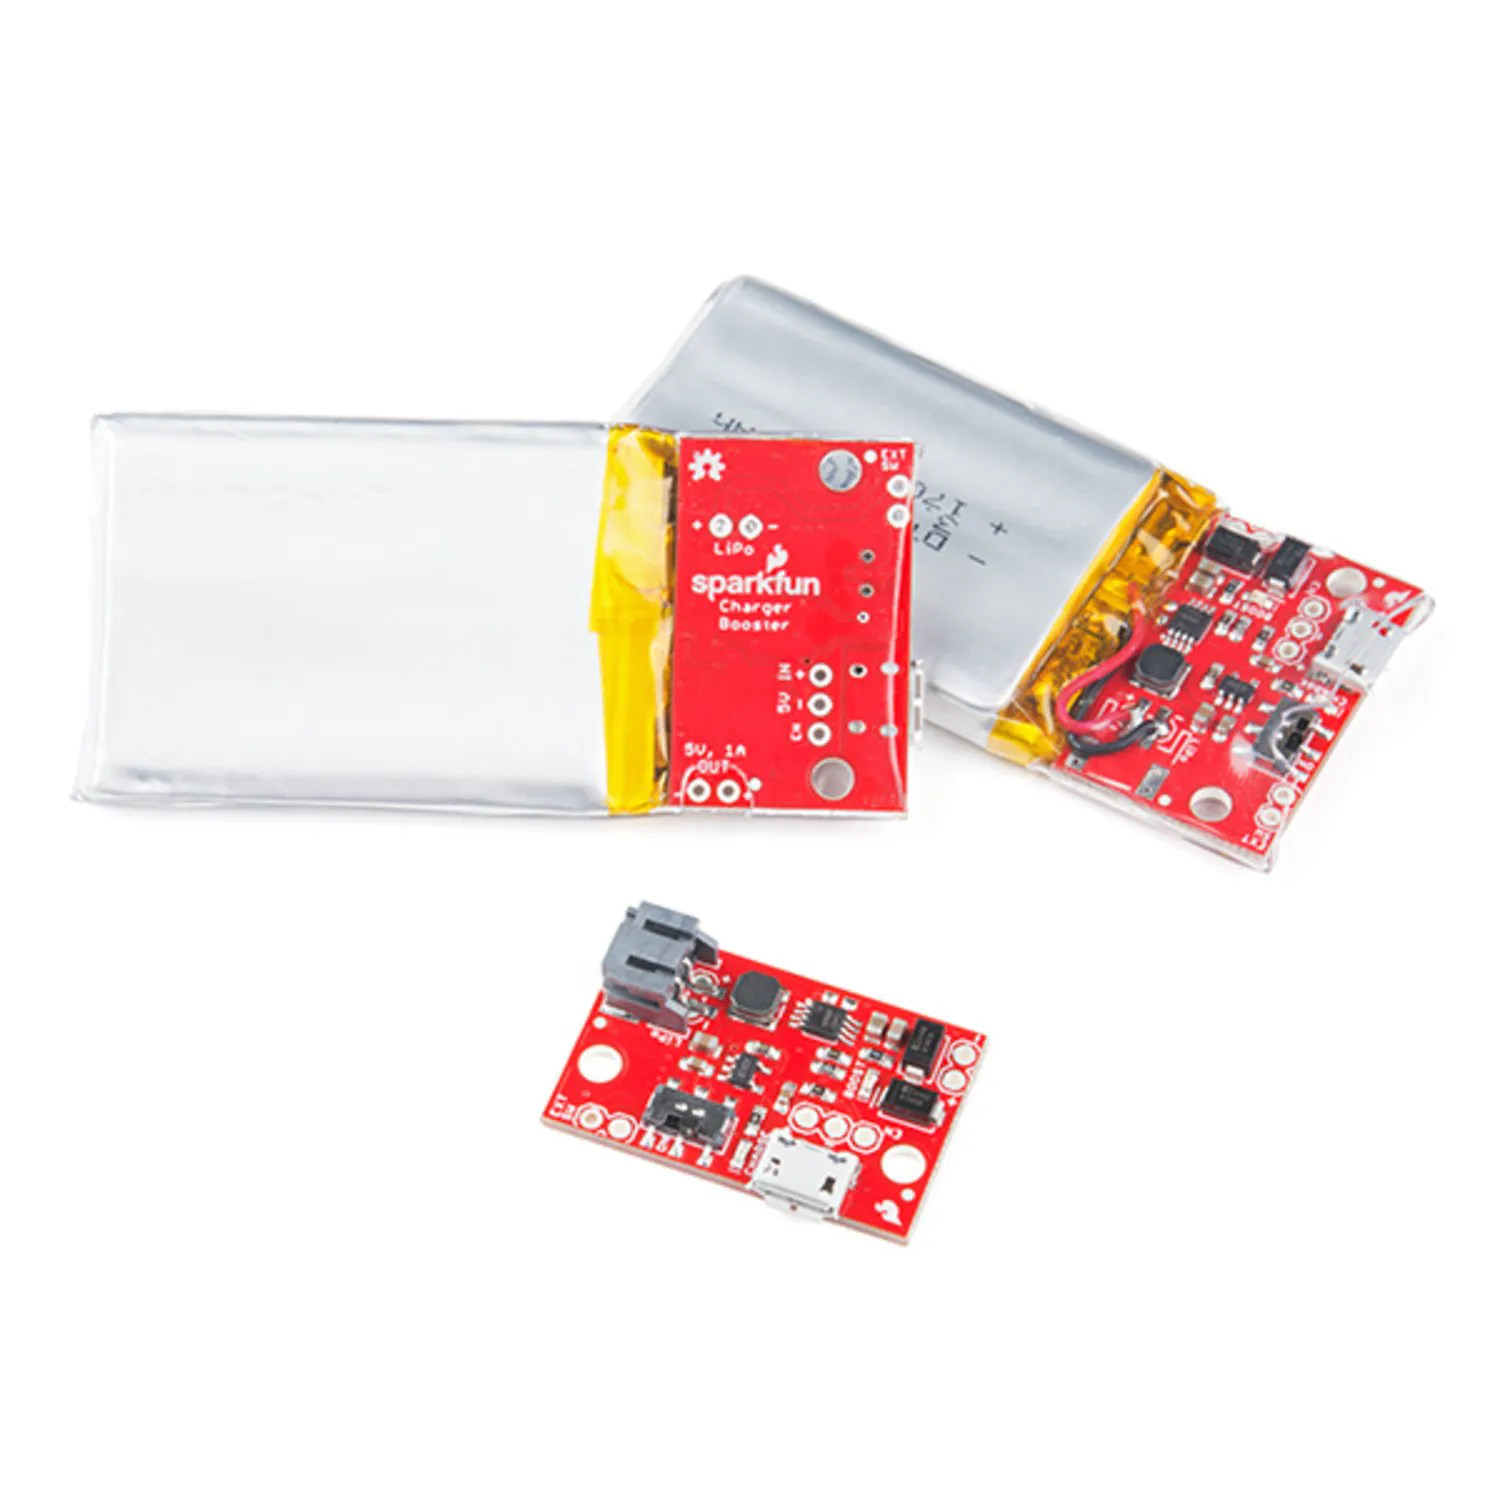 Photo of SparkFun LiPo Charger/Booster - 5V/1A